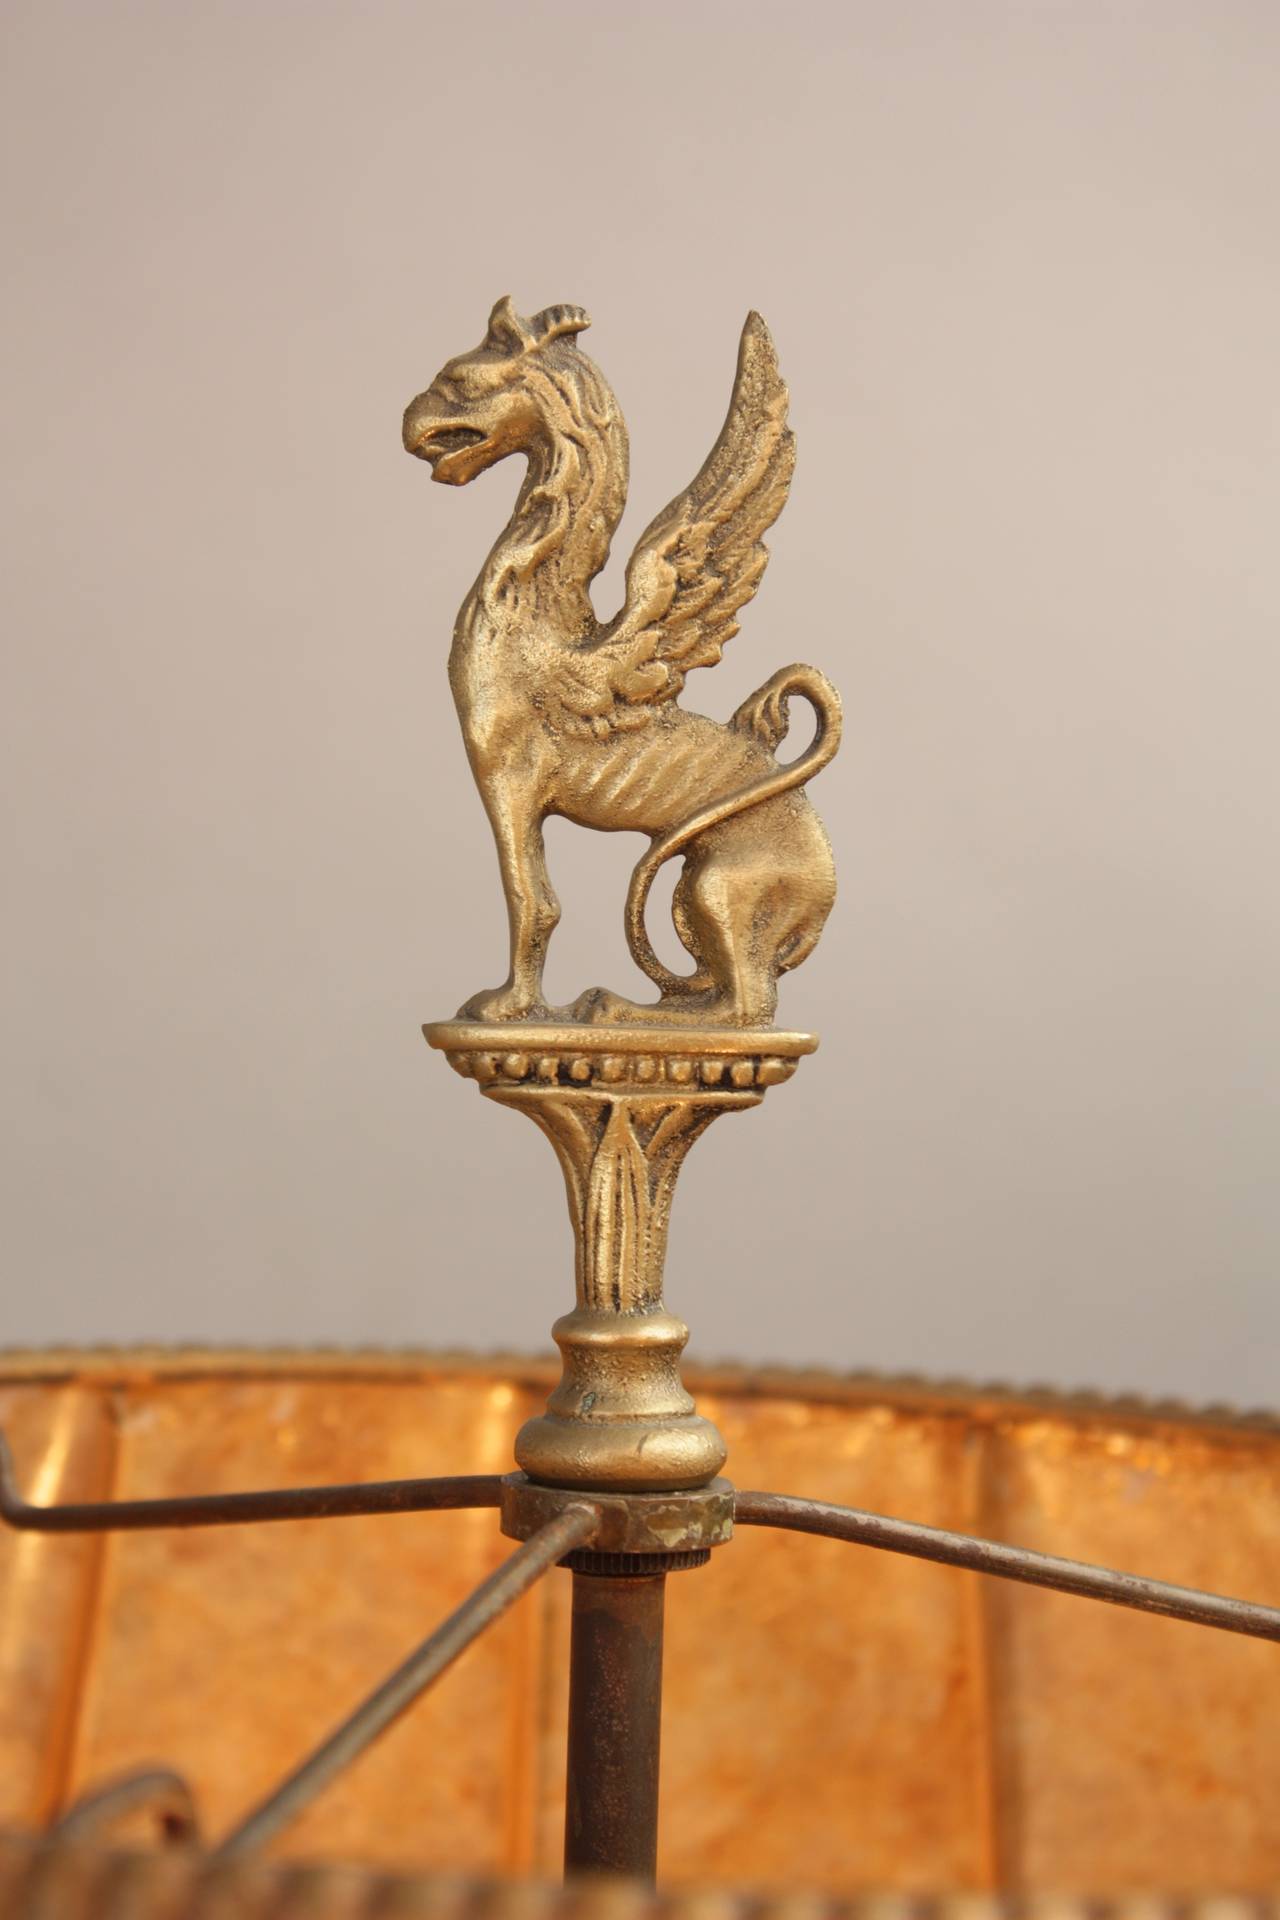 Pristine 1920s lamp with Pegasus finial. Wonderful mica shade. Attributed to the master craftsman Oscar Bach. 31